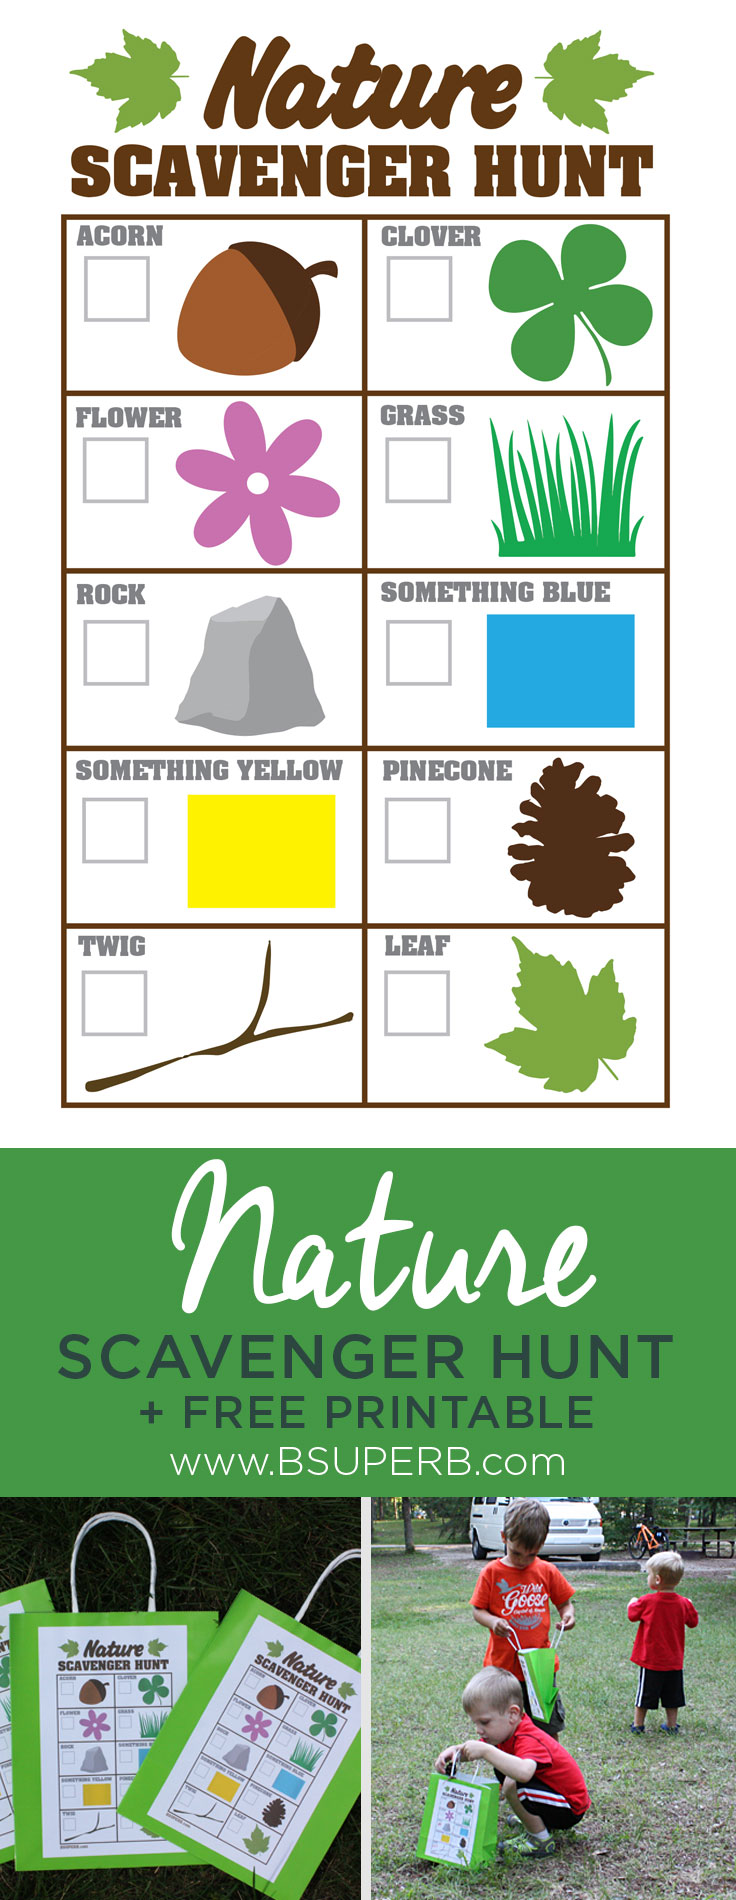 Nature Scavenger Hunt Free Printable and Tutorial